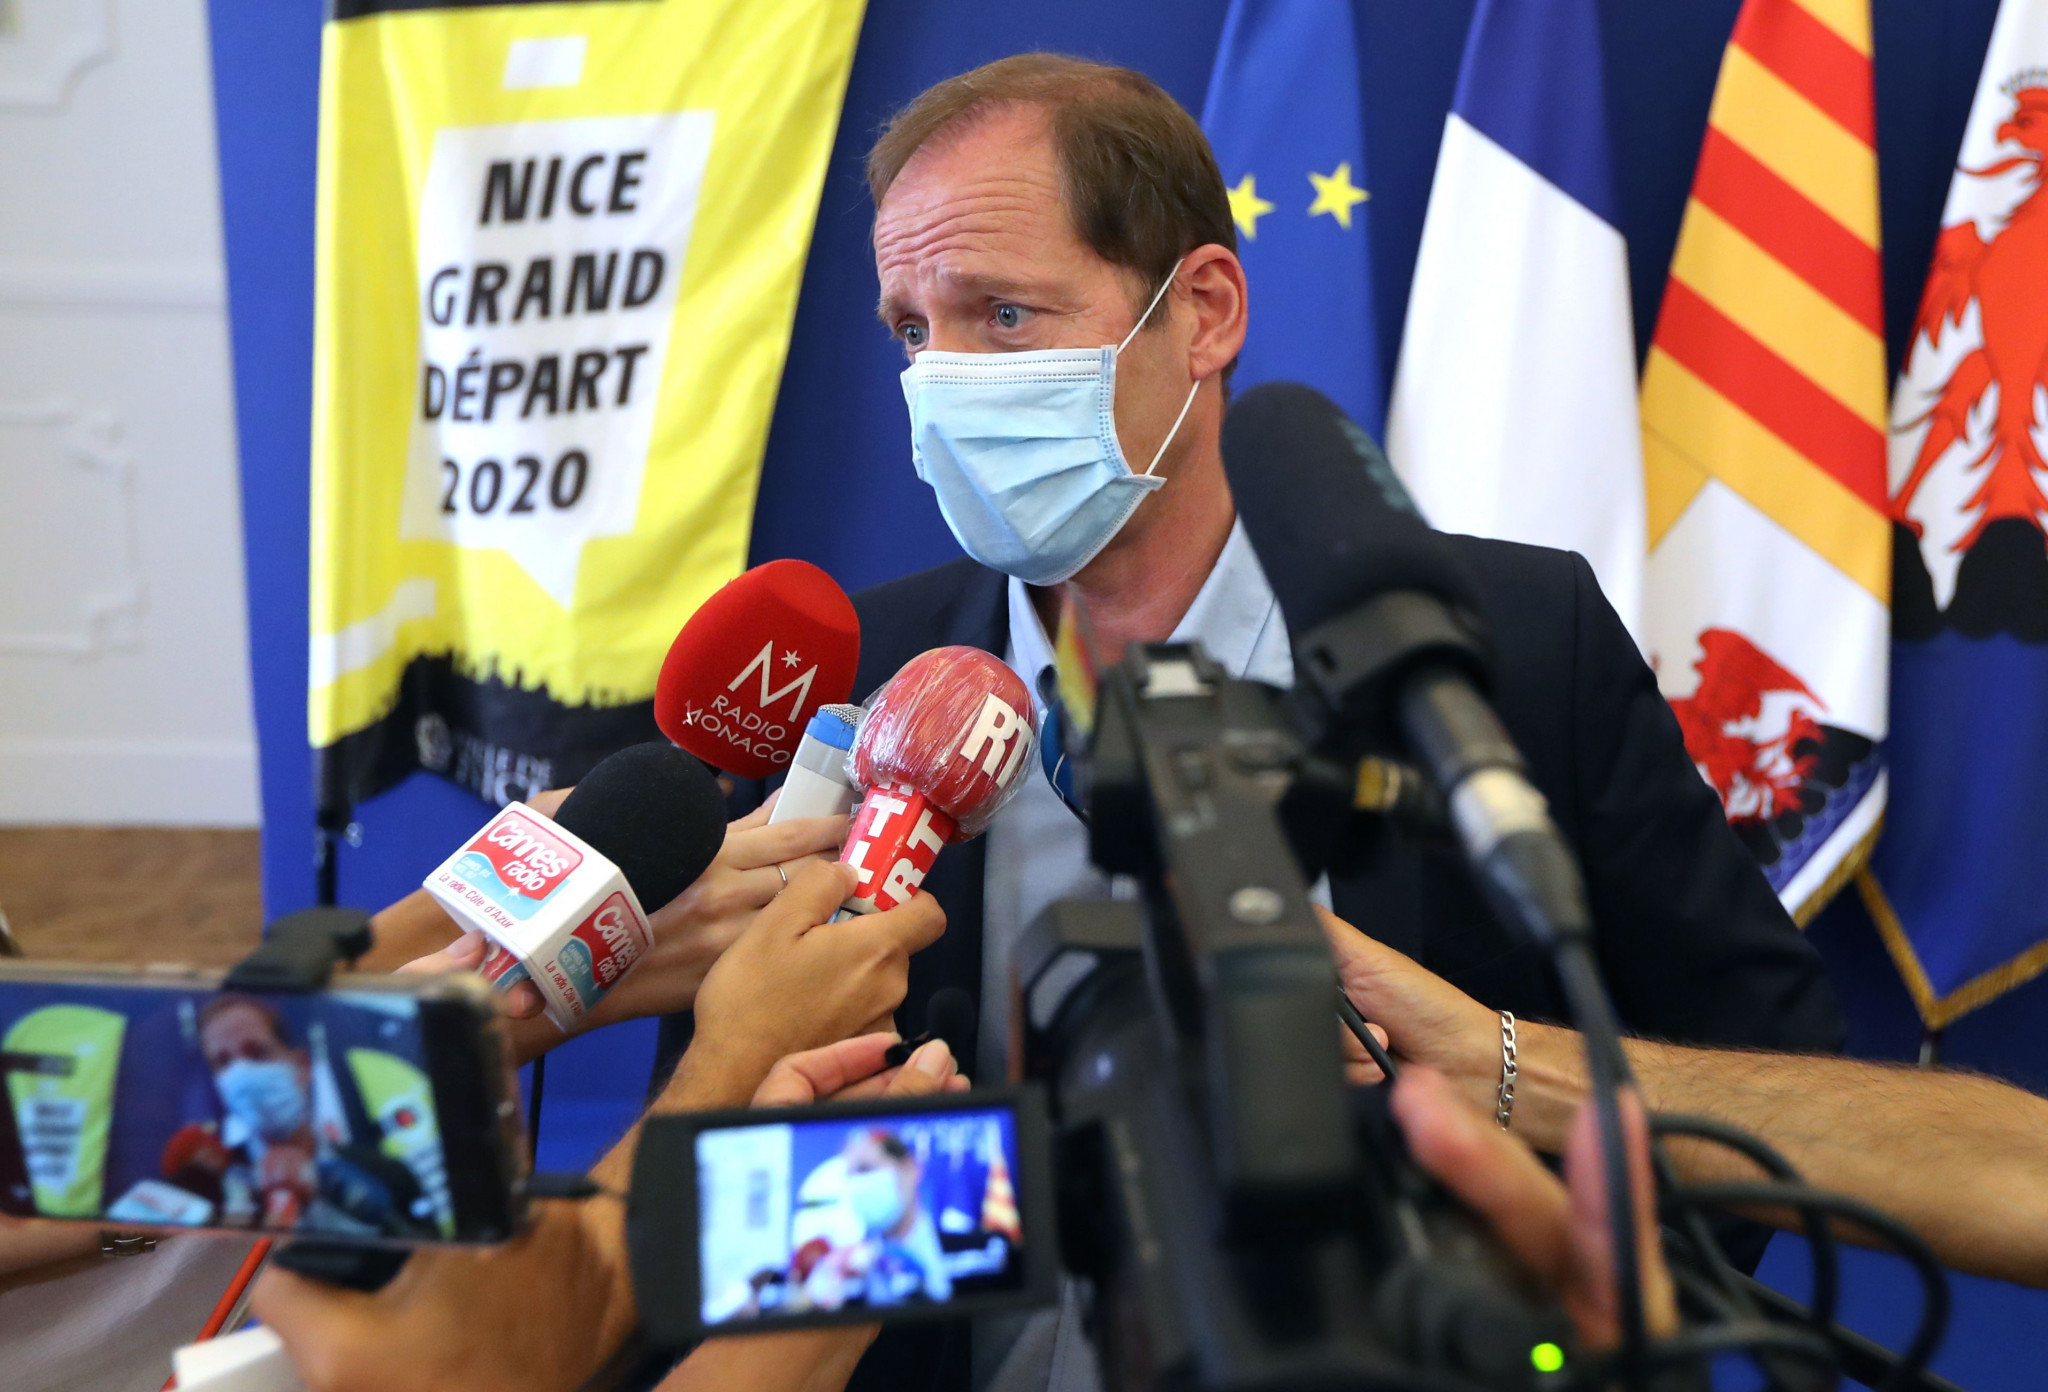 A victory to arrive in Paris, says Tour de France director Prudhomme as race concludes